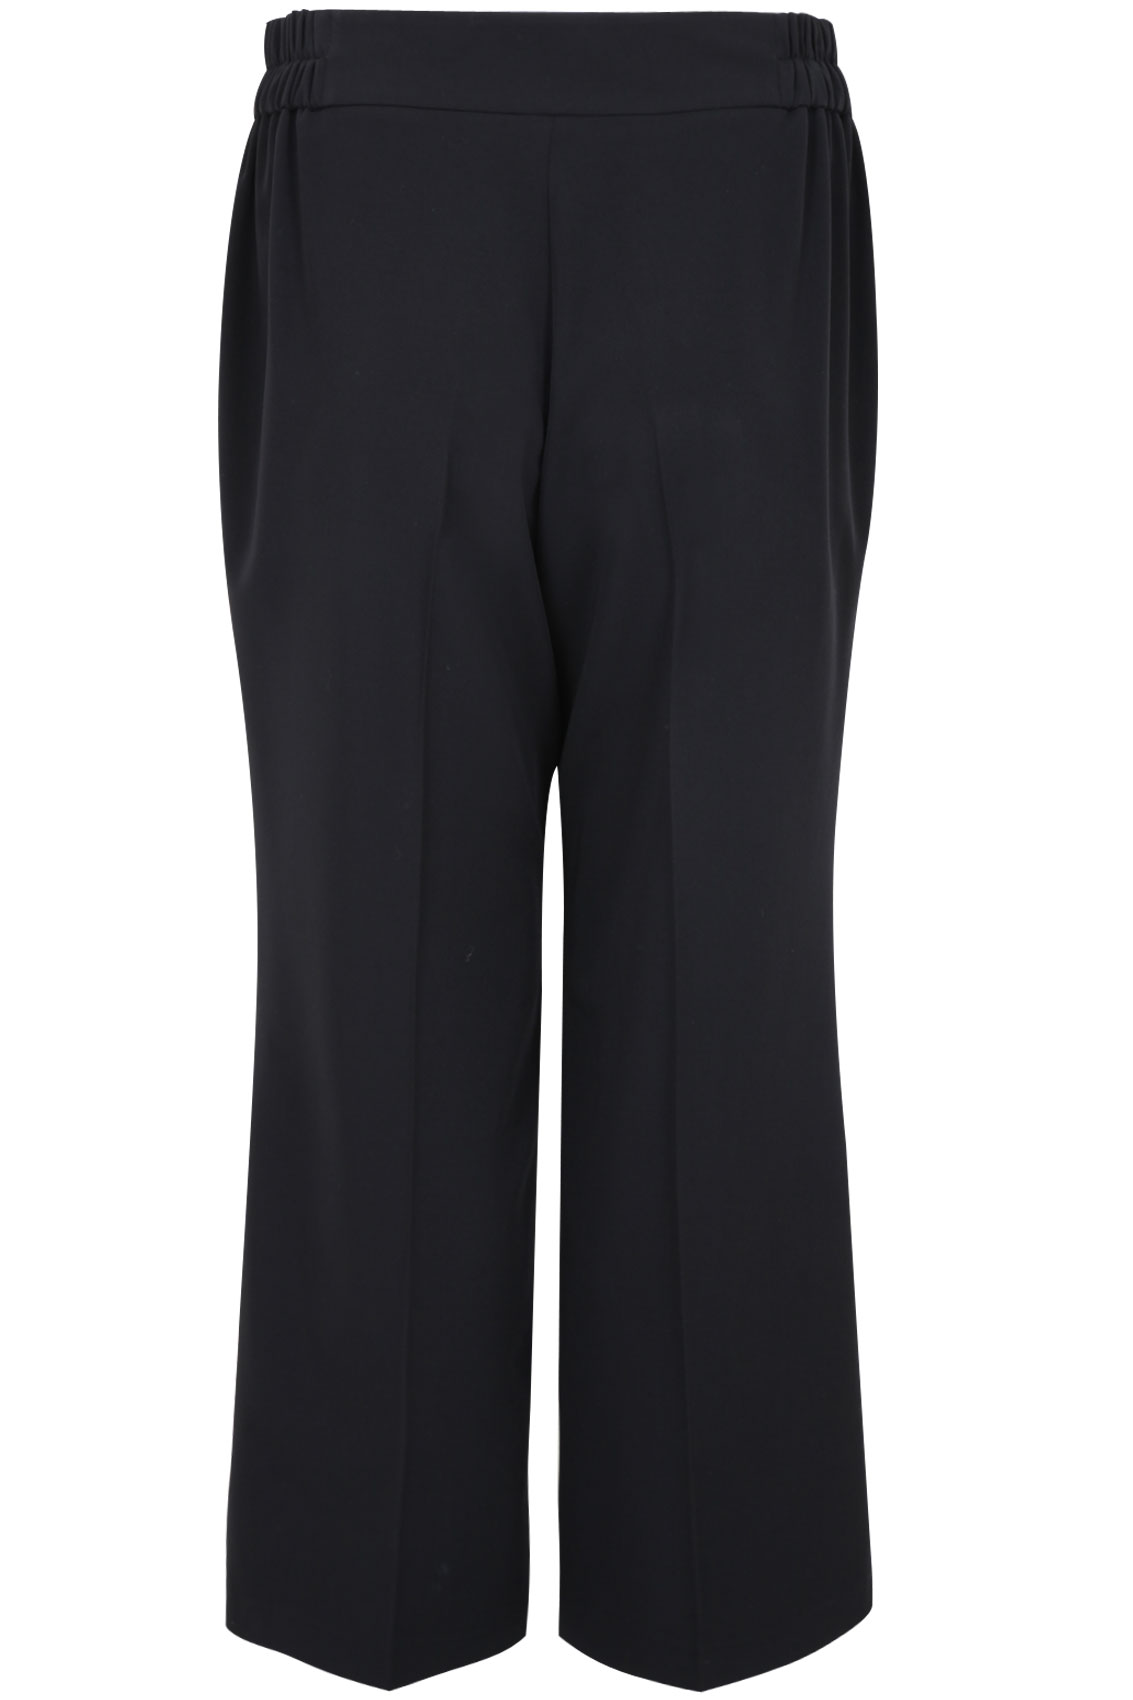 Black Wide Leg Trousers With Stab Stitch Detail plus Size 16 to 32